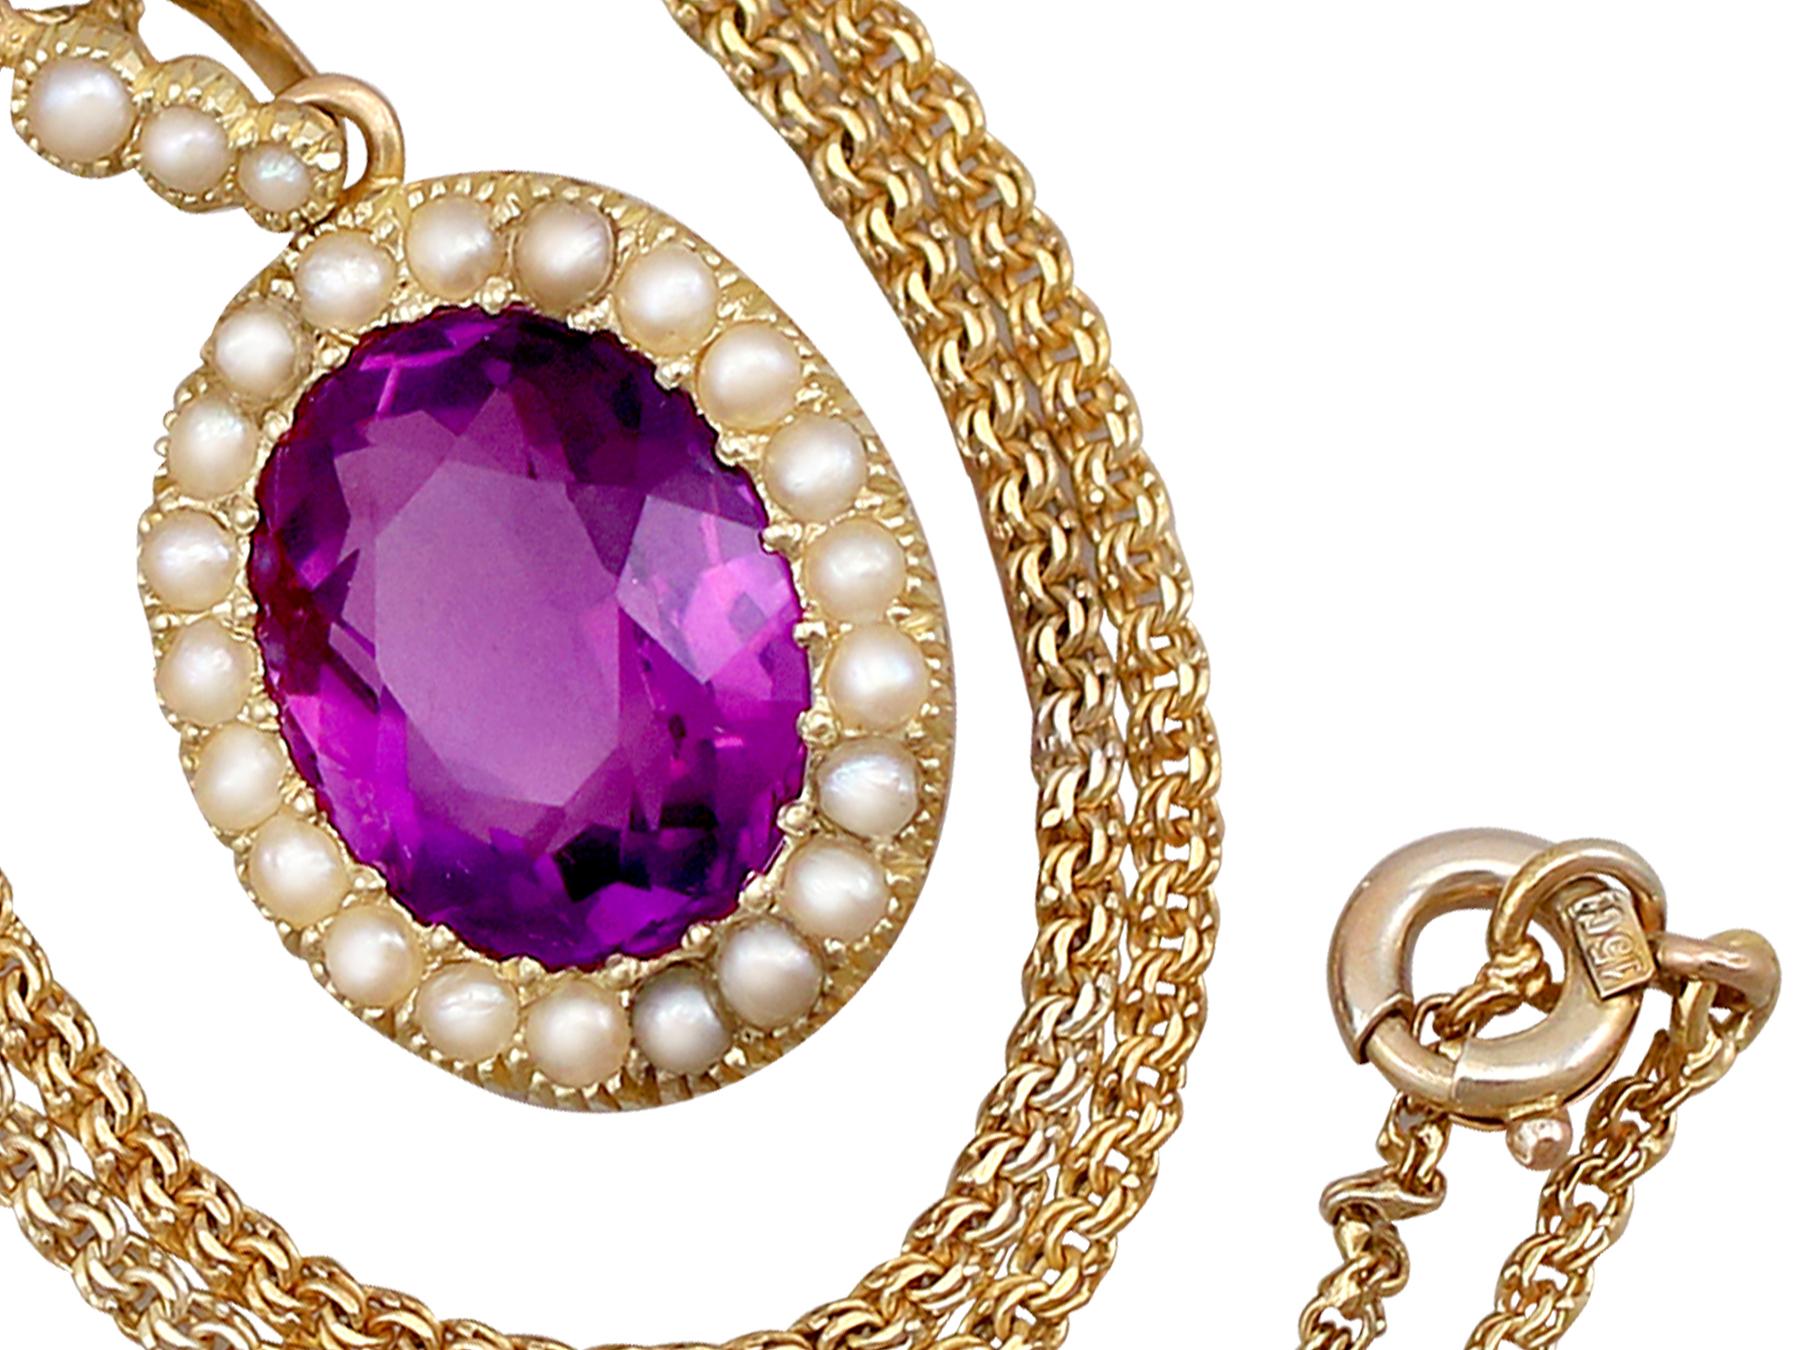 Oval Cut Antique 6.56 Carat Amethyst and Pearl Yellow Gold Pendant